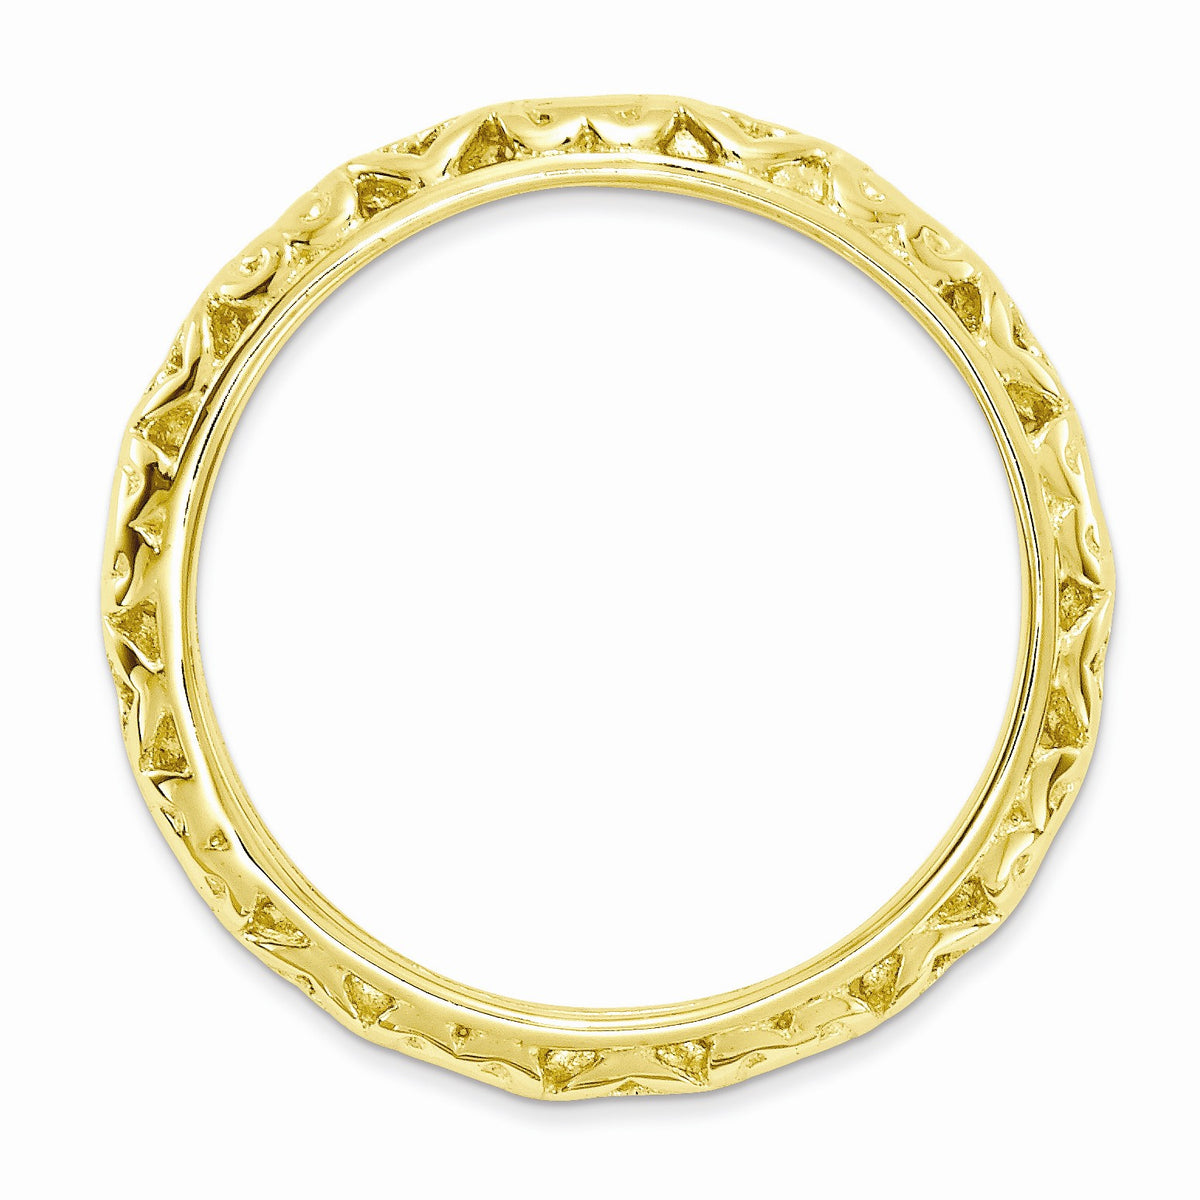 Alternate view of the 3.5mm Gold Tone Sterling Silver Stackable Domed Carved Heart Band by The Black Bow Jewelry Co.